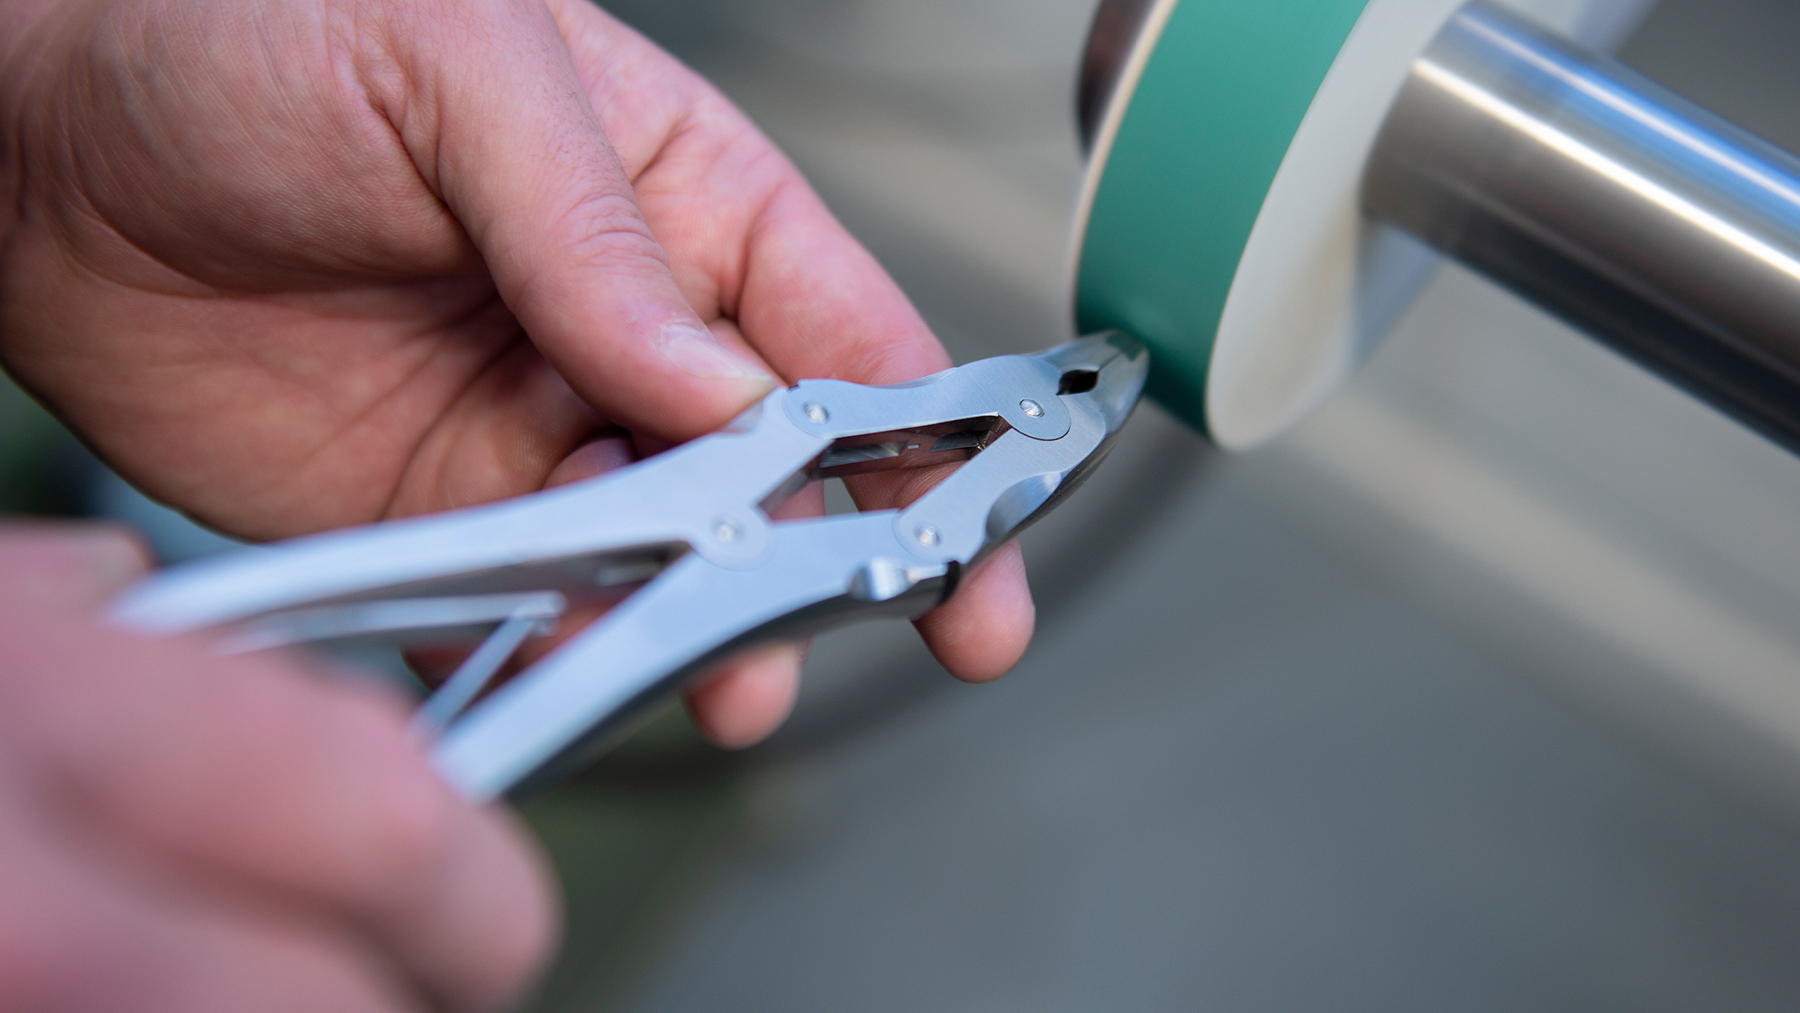 A set of surgical pliers being polished by a professional surgical repair tool.